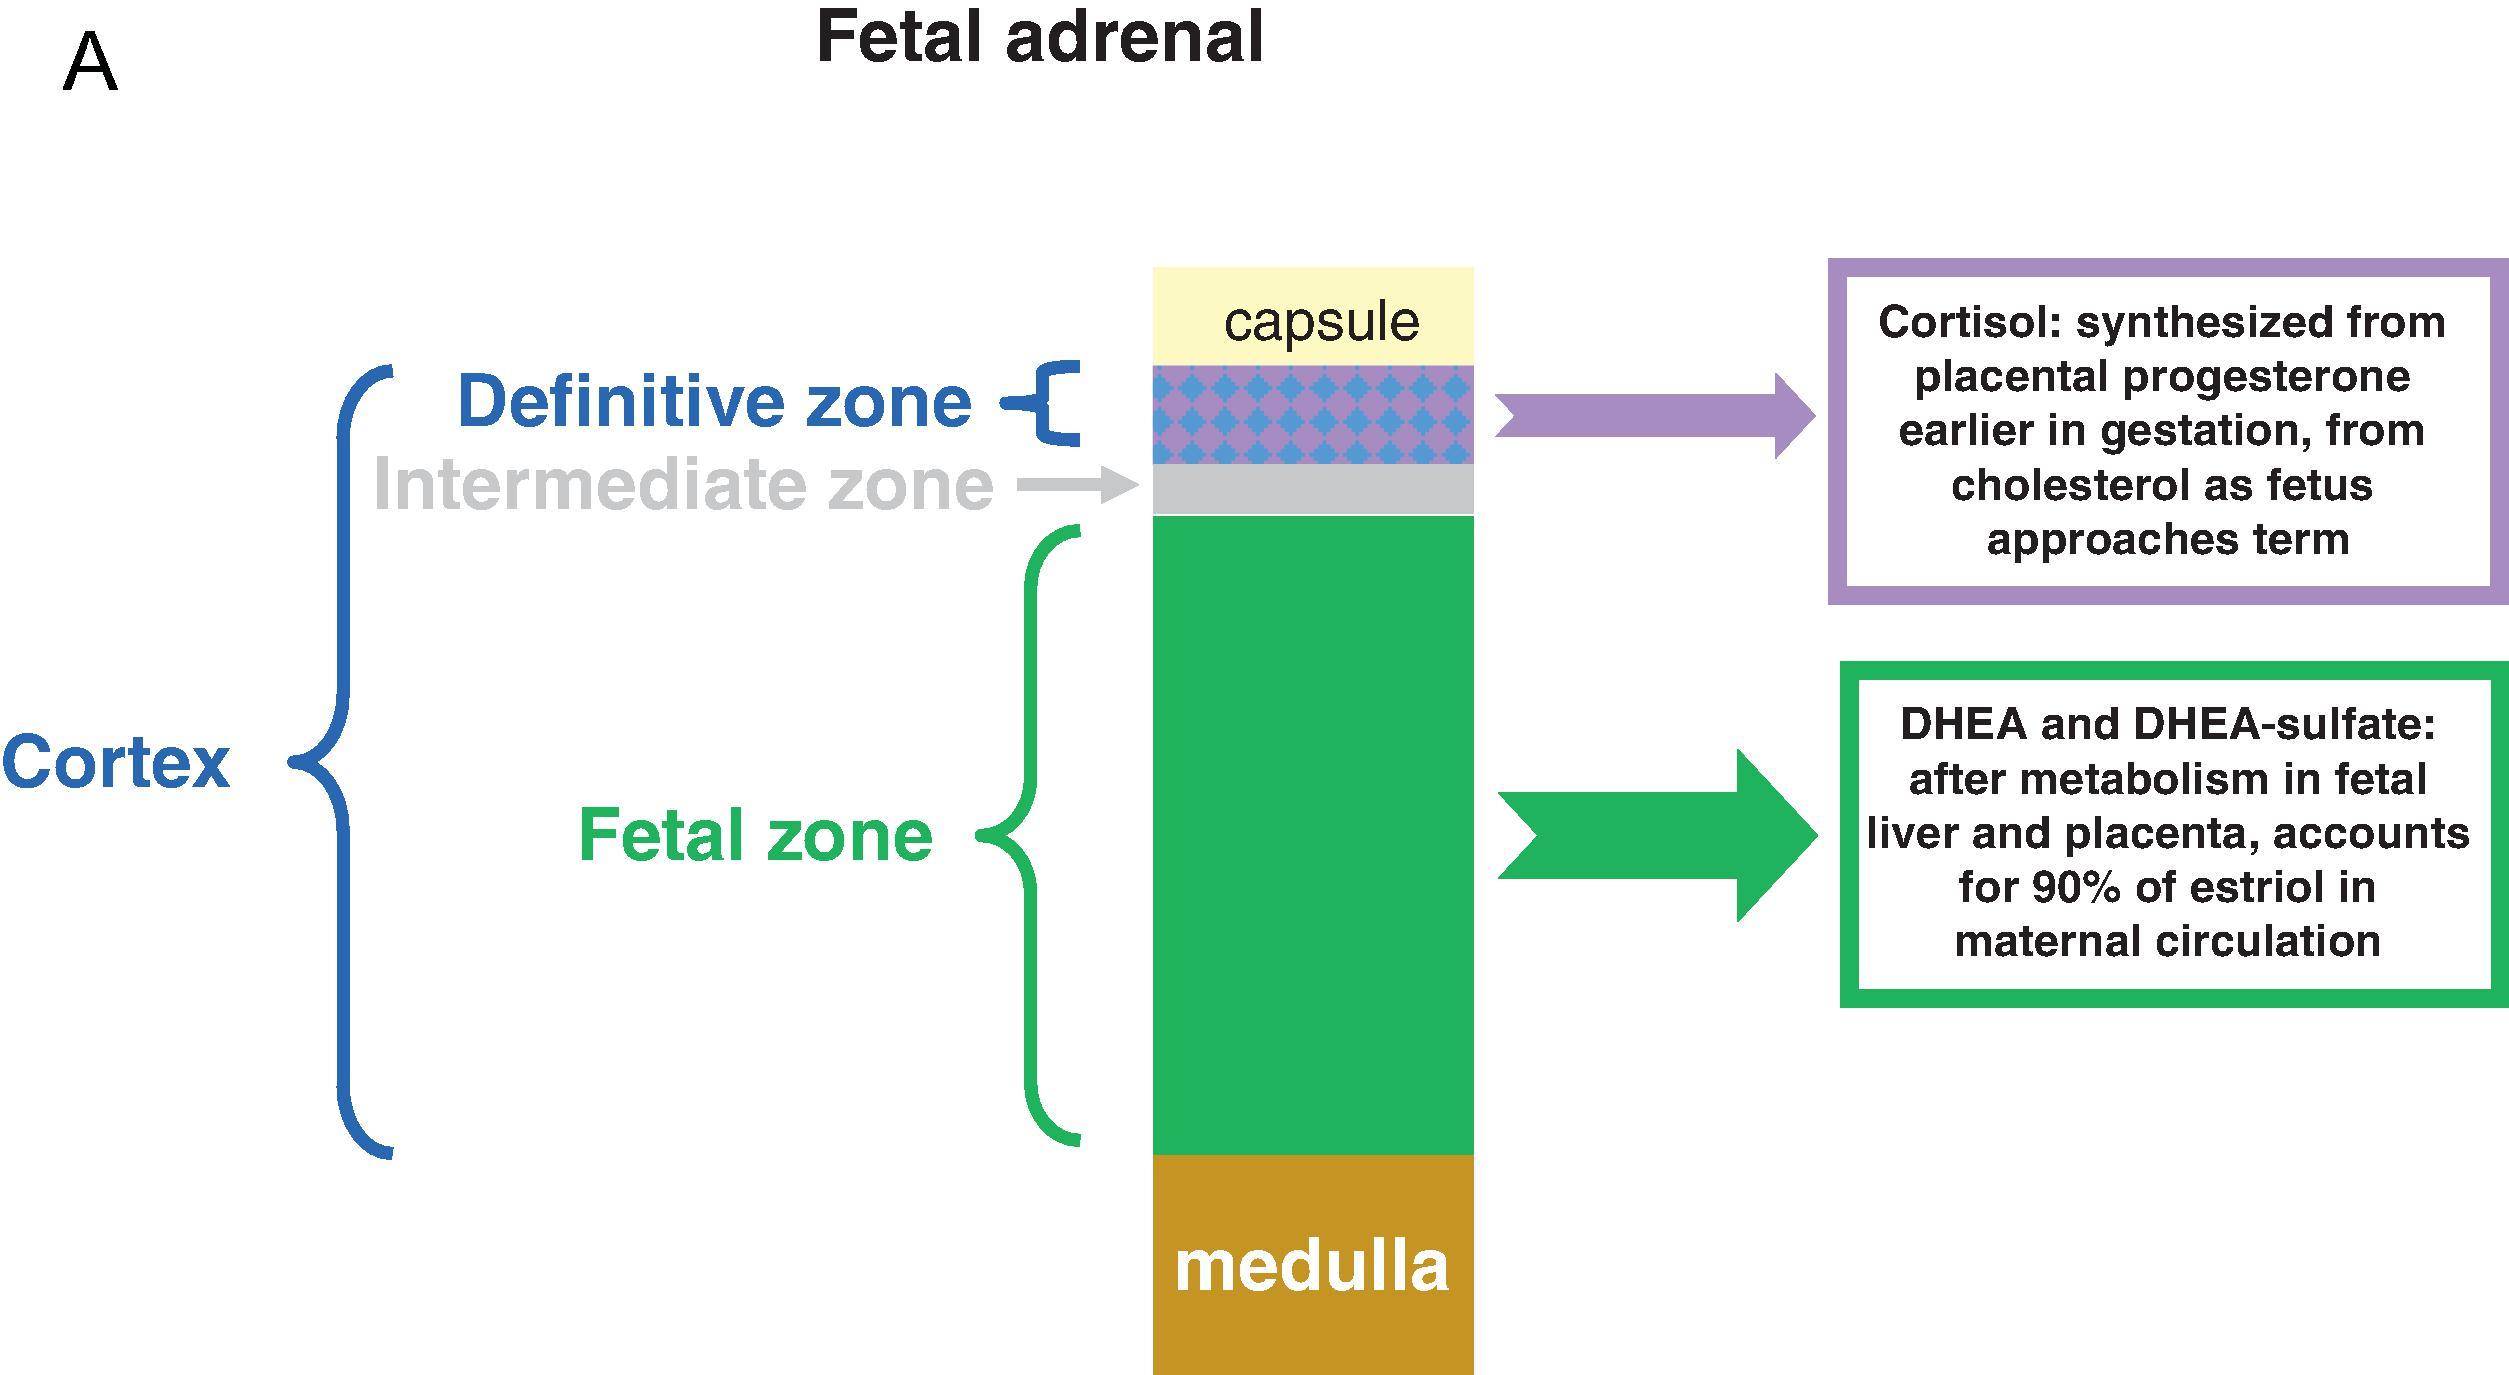 Fig. 27.1, Development of the Adrenal Cortex. (A) In later gestation, the fetal adrenal cortex consists of a large fetal zone and a small outer definitive zone, with an intermediate zone between the two. The fetal zone makes large amounts of dehydroepiandrosterone sulfate (DHEAS), and dehydroepiandrosterone (DHEA). The DHEAS and DHEA are metabolized by the fetal liver and the placenta to estriol. The definitive zone produces cortisol, initially from placental progesterone, but as 3βHSD2 expression increases as the fetus approaches term, the cortisol can be produced from cholesterol, as it will be after birth. (B) At term, the fetal adrenal glands are approximately the same size as the adult adrenal glands. After birth, the fetal zone involutes (as does the intermediate zone). The definitive zone differentiates into the outer aldosterone-producing zona glomerulosa and the cortisol-producing zona fasciculata. Throughout childhood, the adrenal cortex grows and the zona reticularis develops between the zona fasciculate and the medulla.